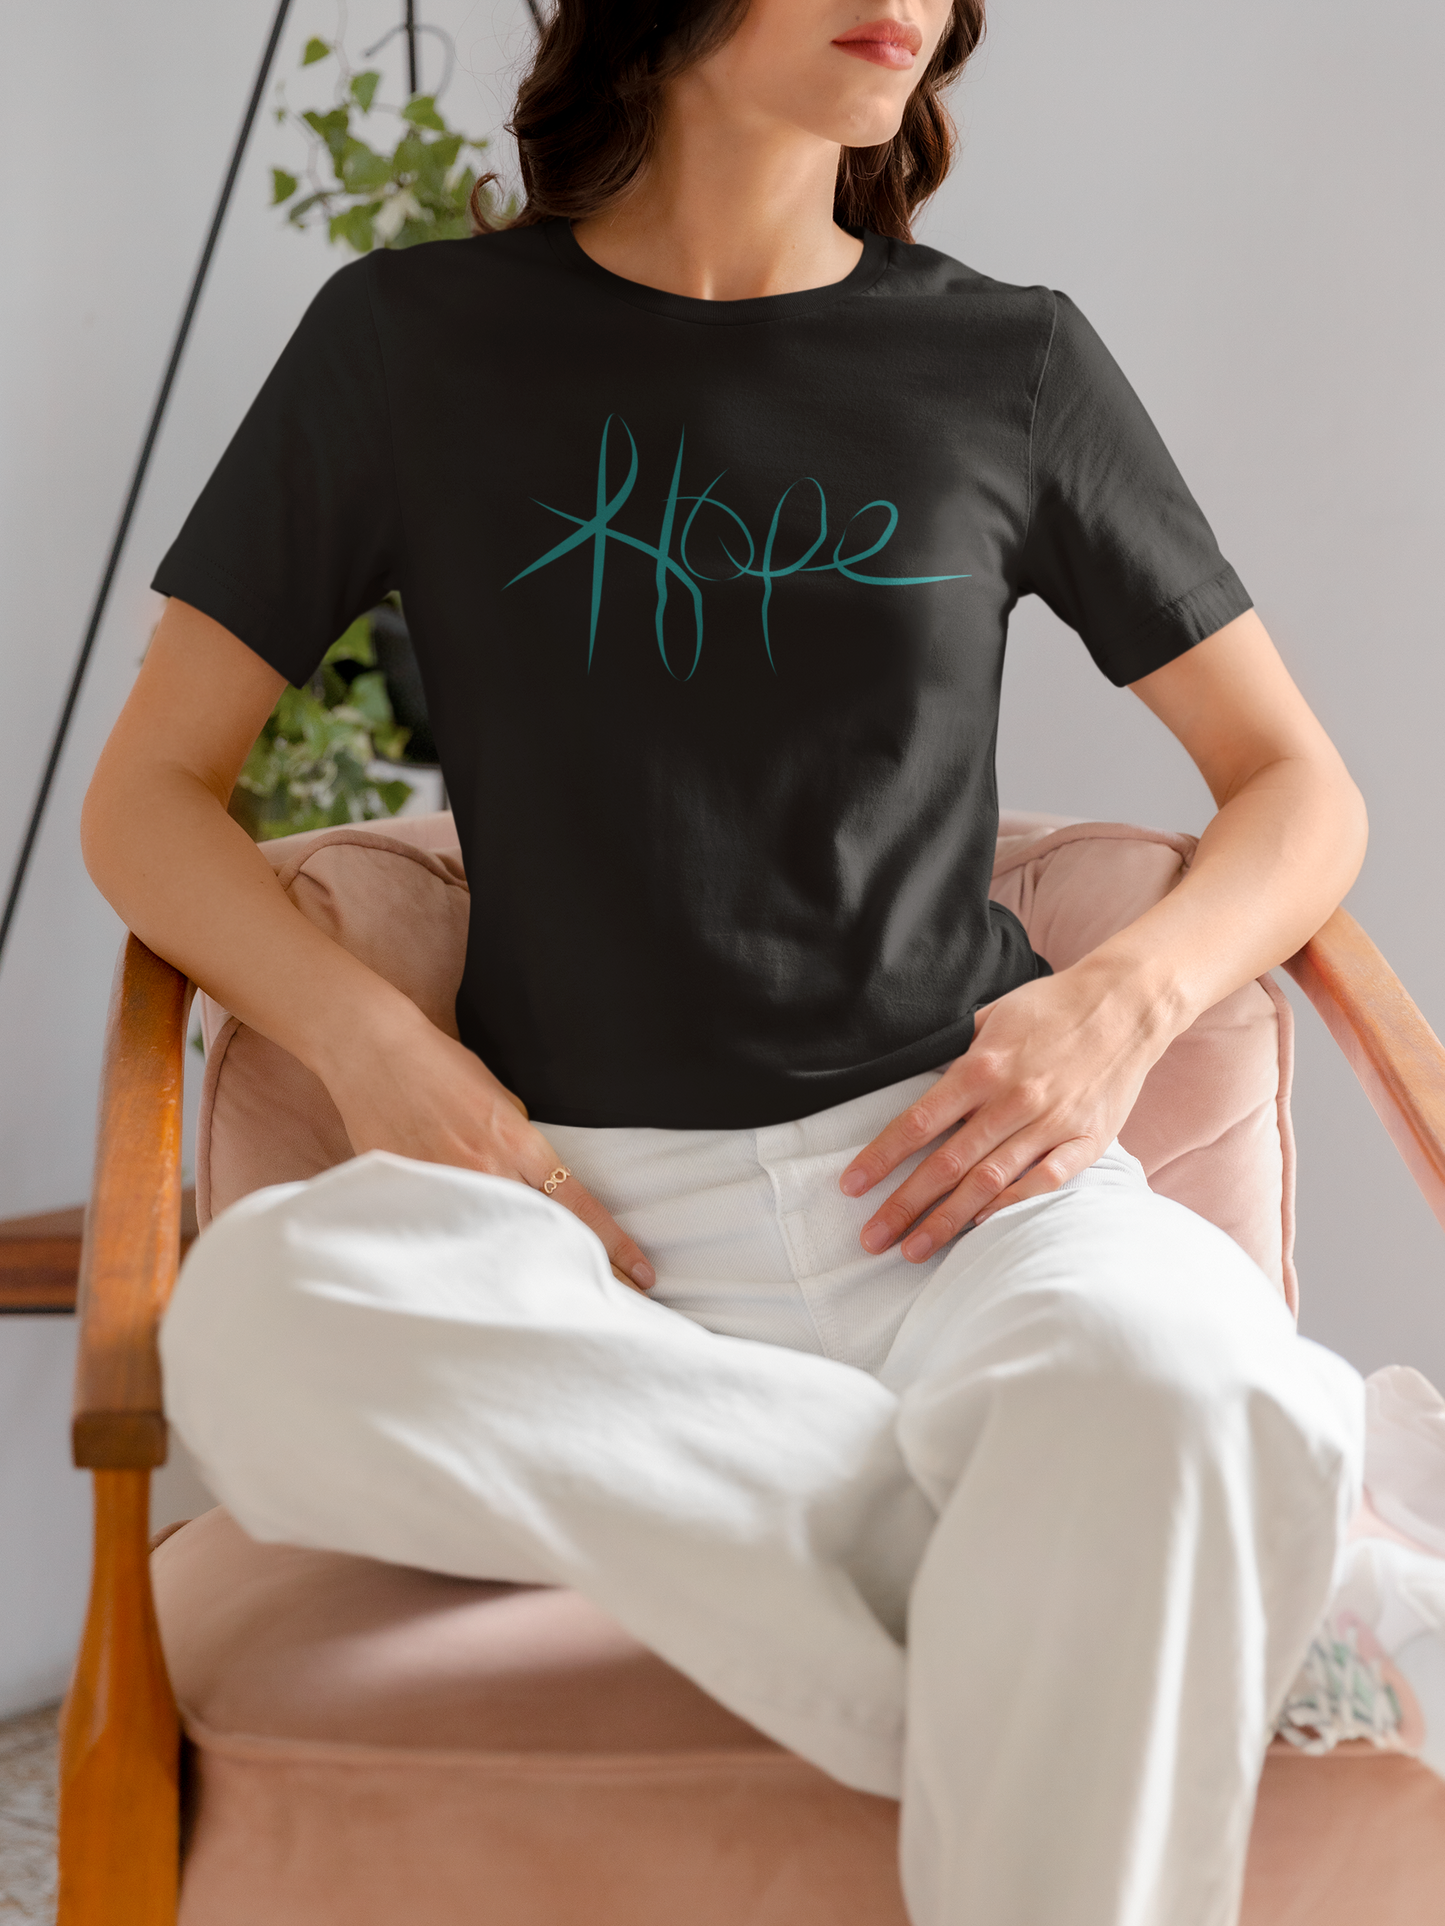 Wear the Power of Hope!  - Teal Hope Ribbon T-Shirt